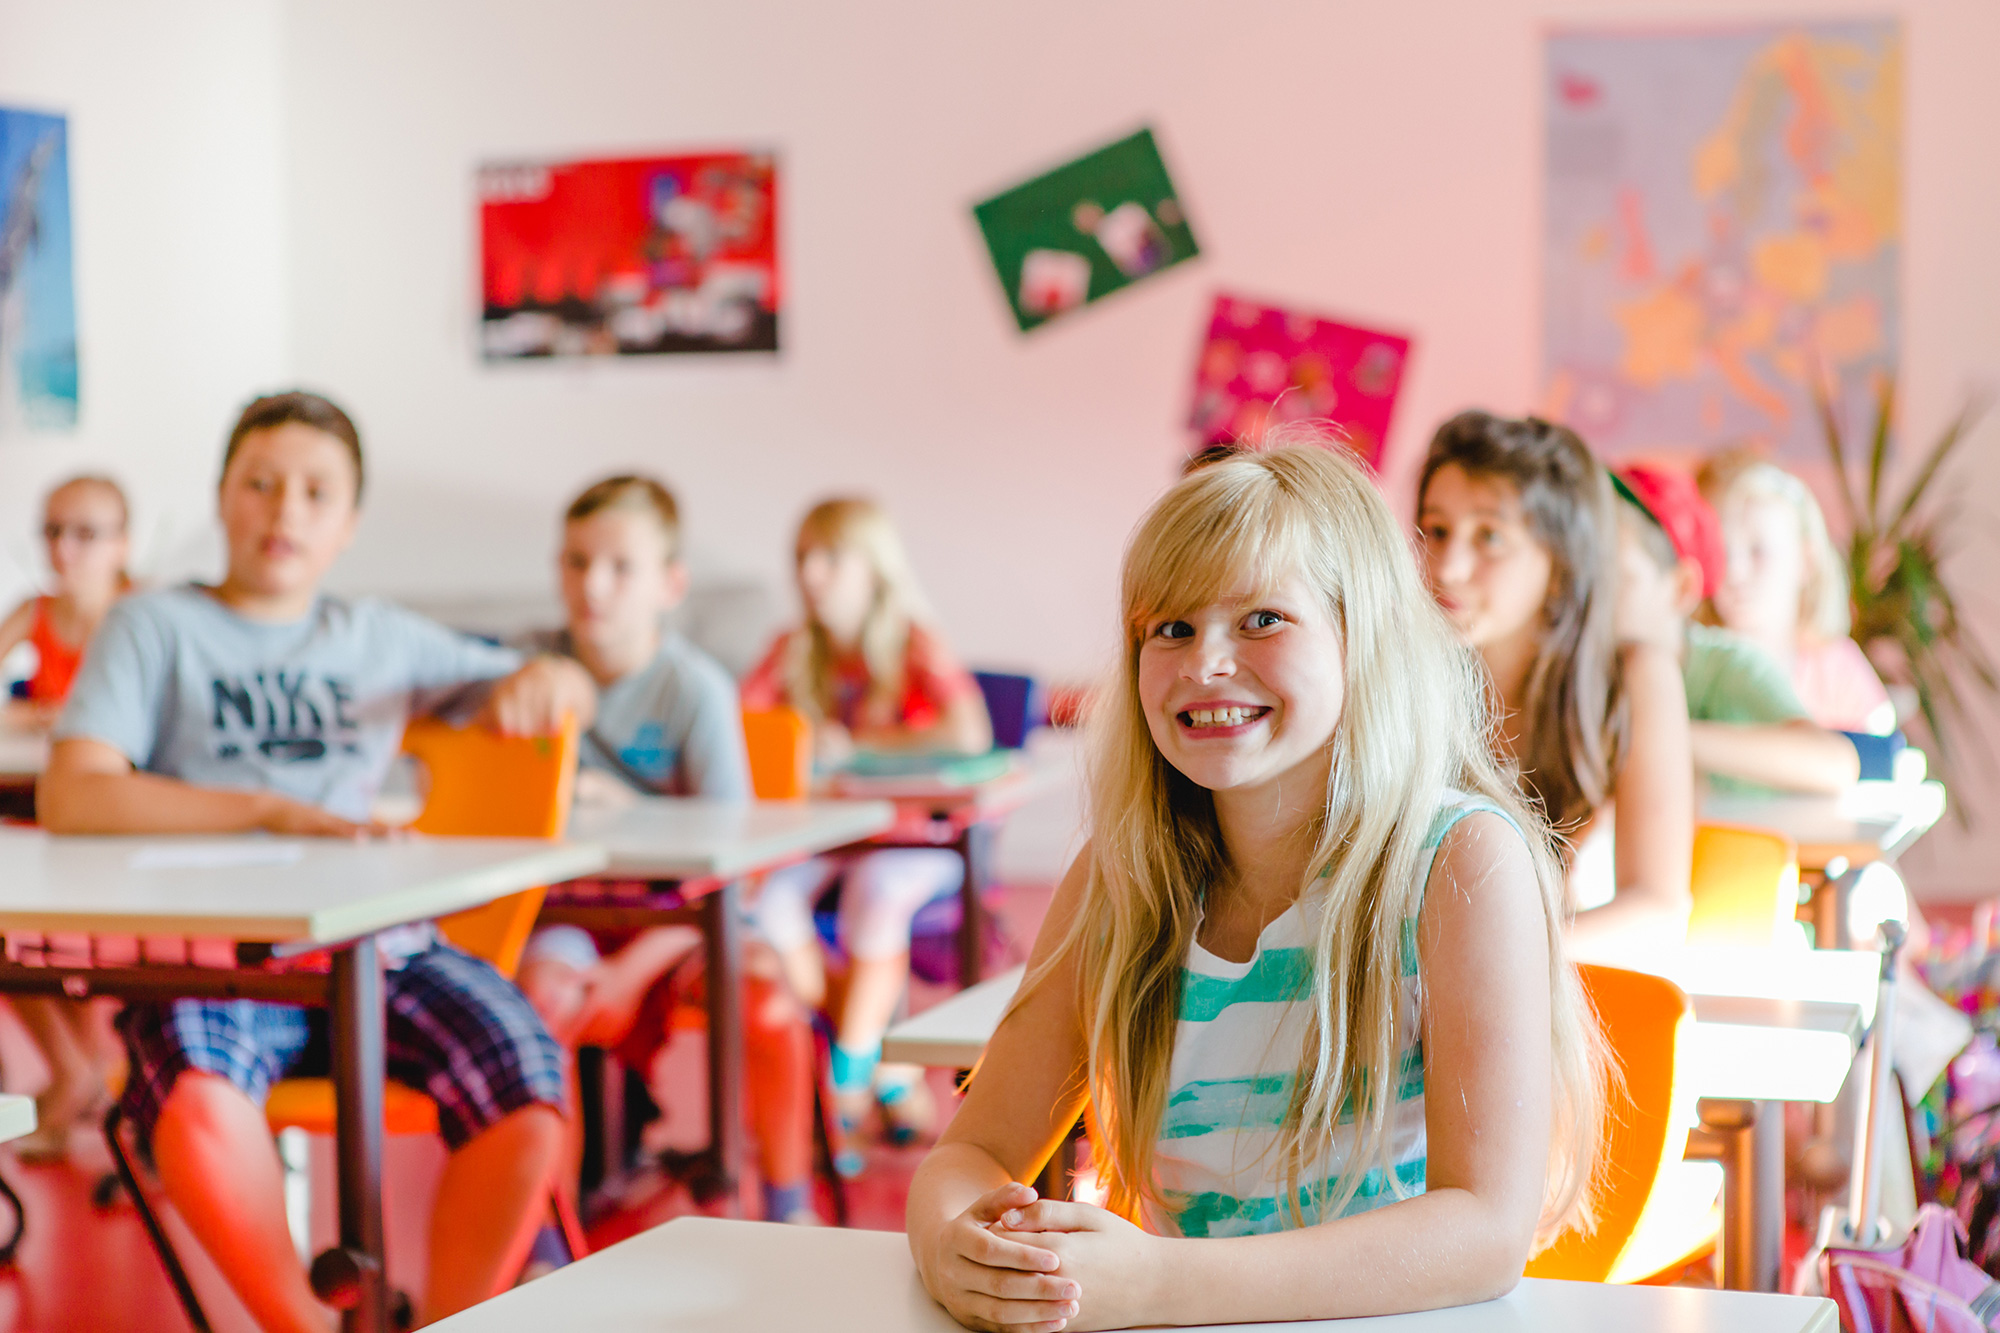 Students at their desks in the classroom. In the foreground, a girl smiles at the camera.